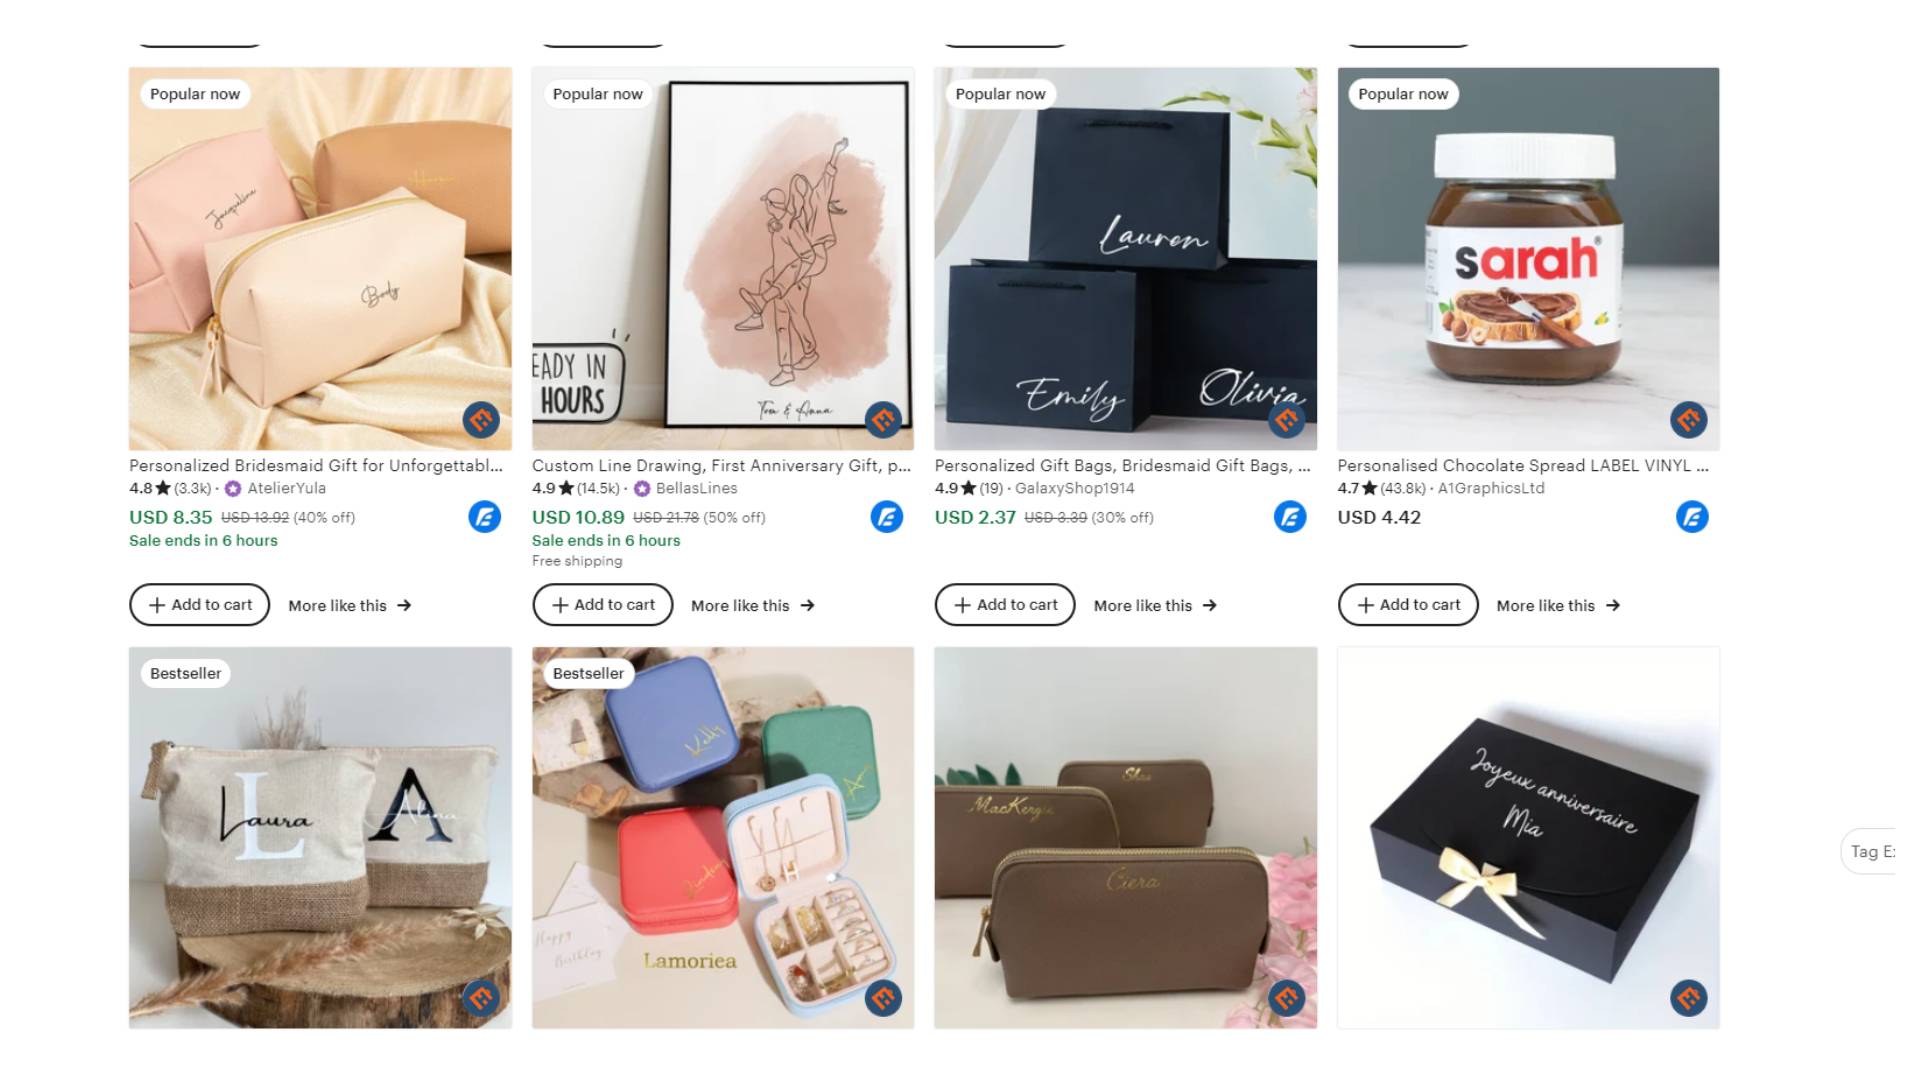 Personalized Products Sell Best on Etsy